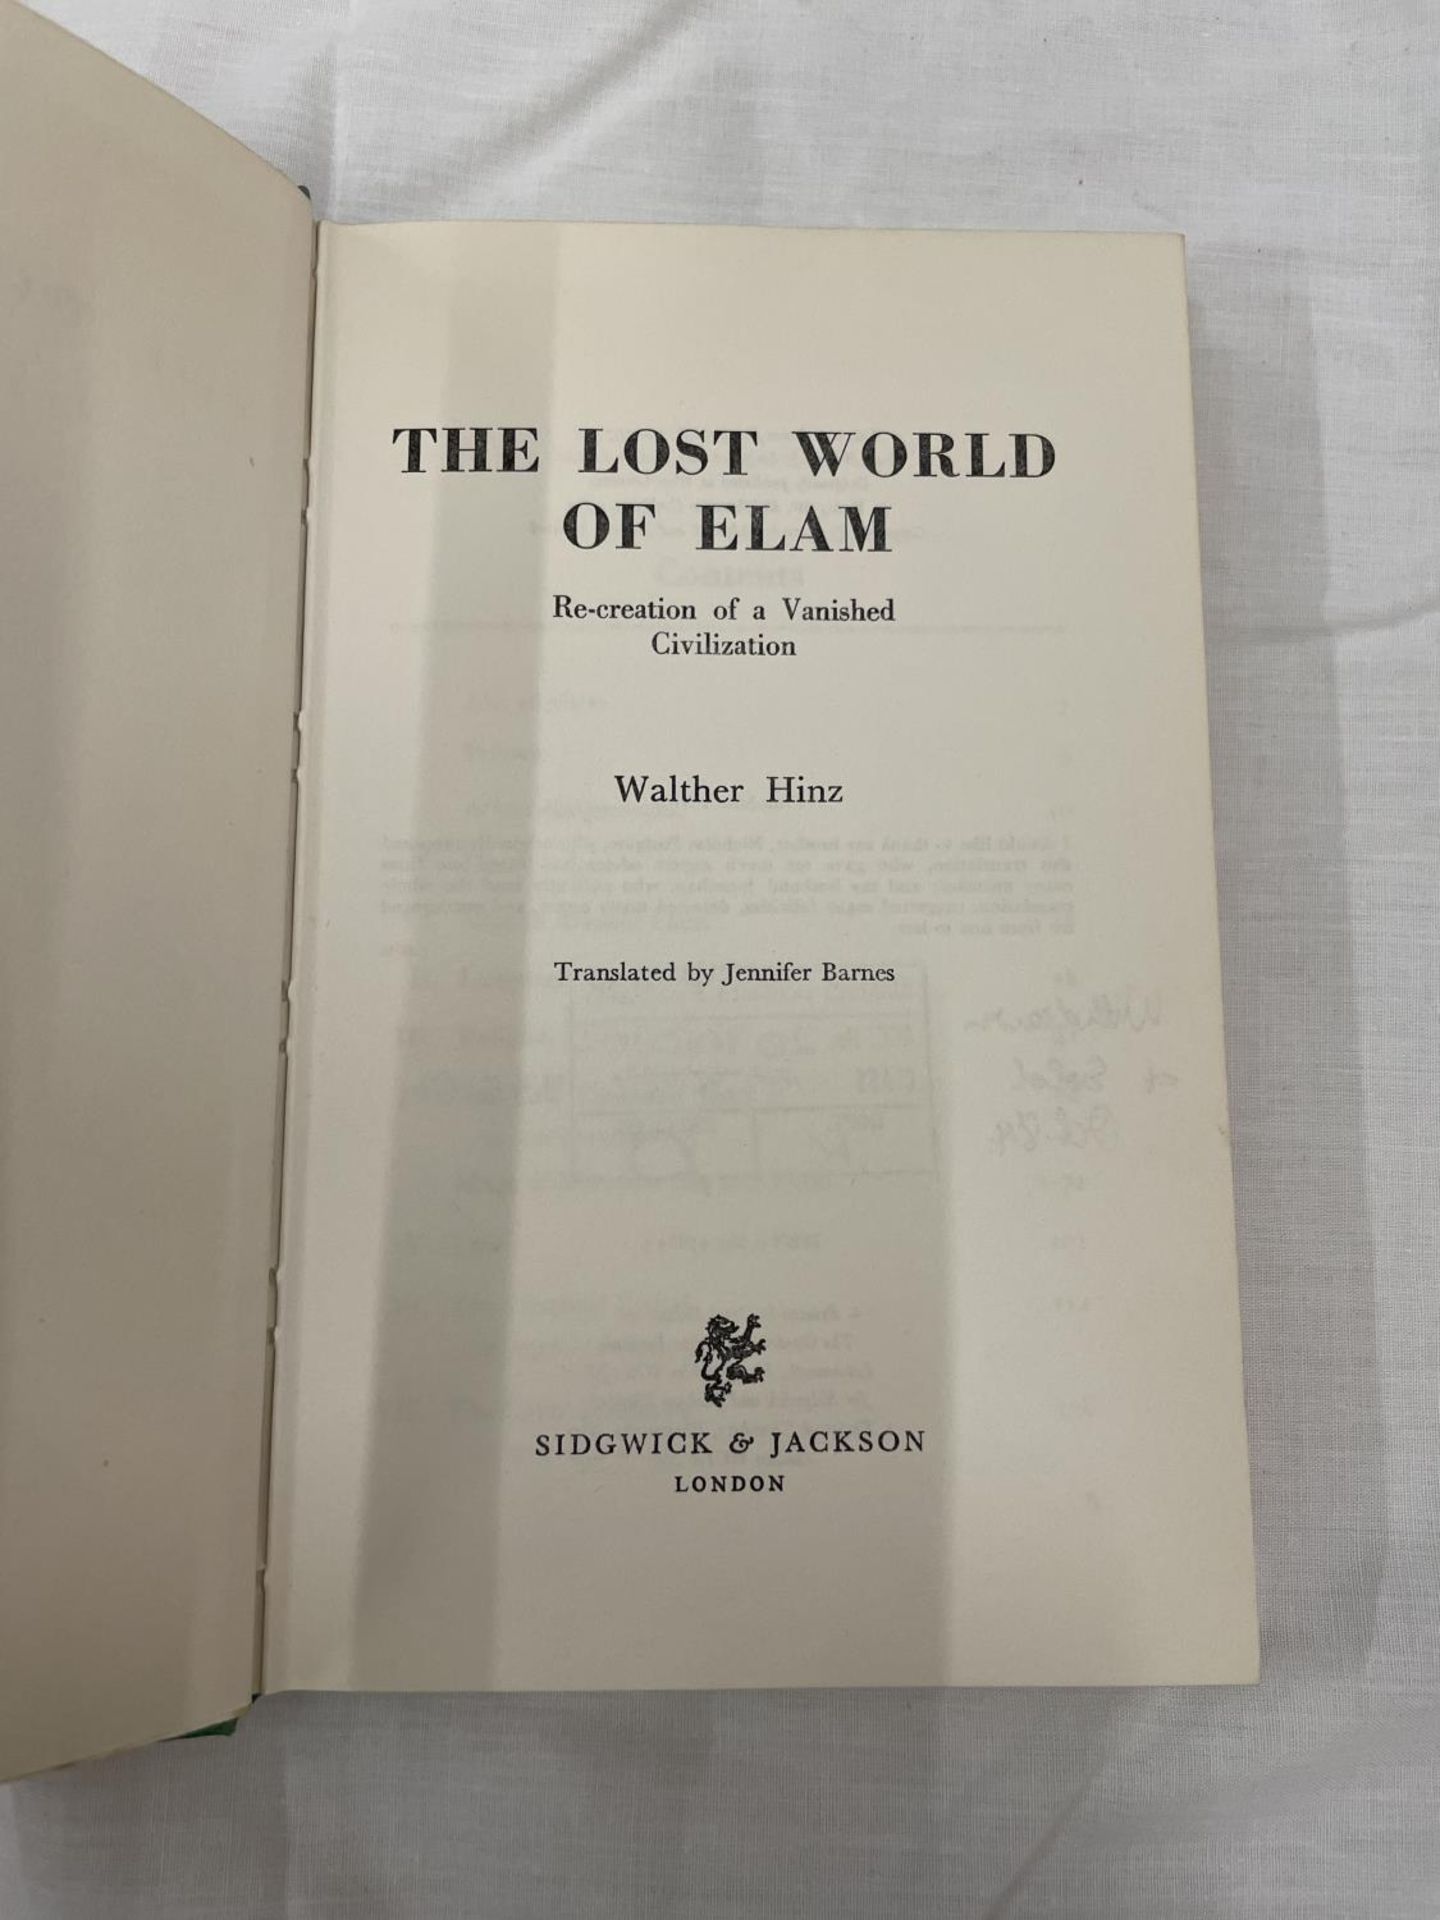 A FIRST EDITION LOST WORLD OF ELAM BY WALTER HINZ - Image 3 of 4